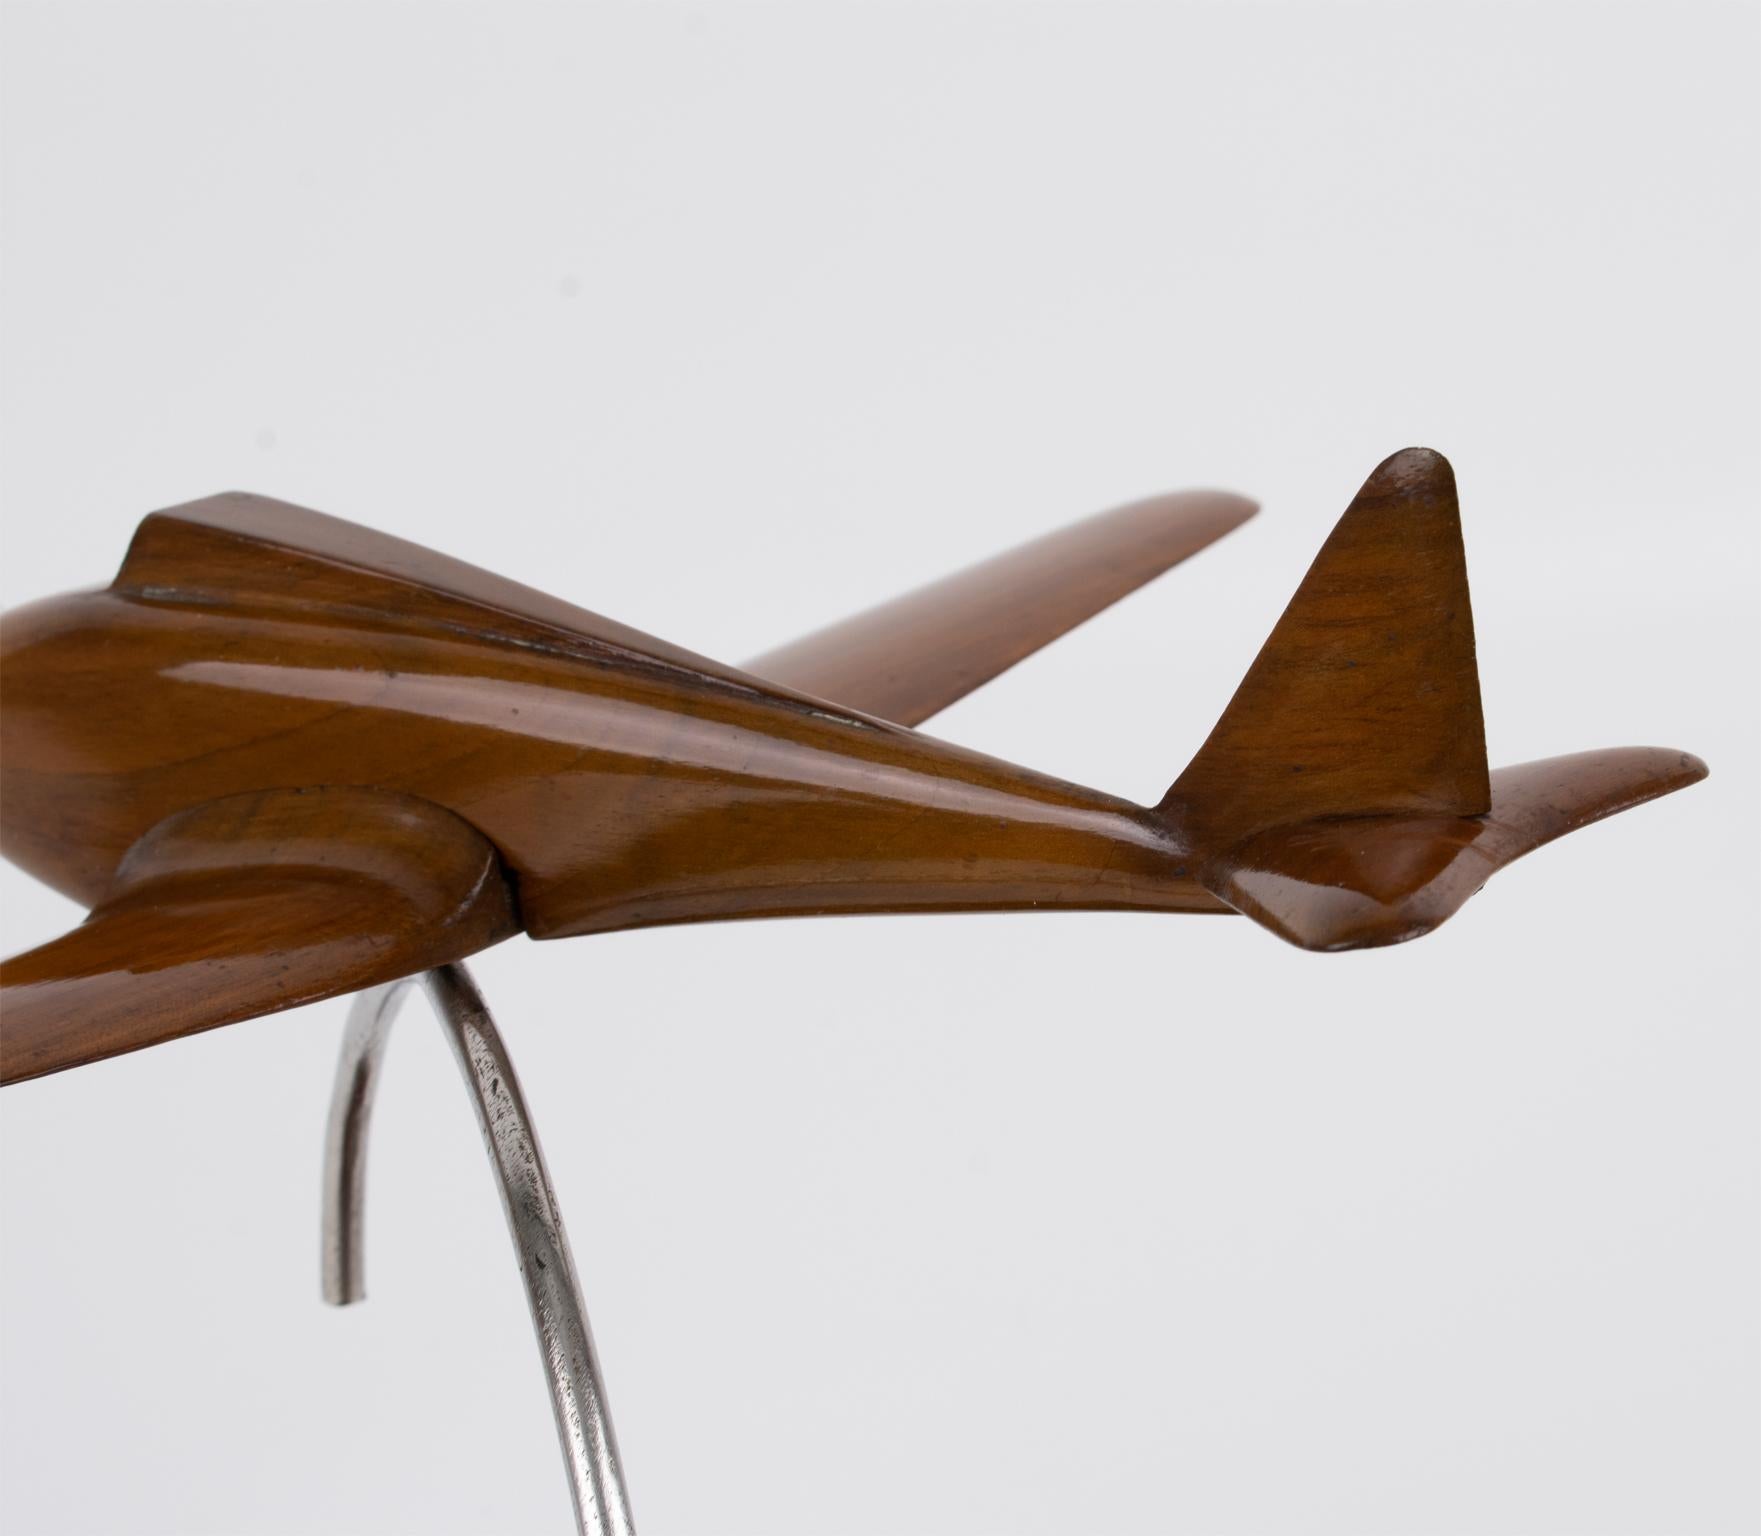 Art Deco Wood and Metal Airplane Aviation Propeller Model, France 1930s For Sale 4